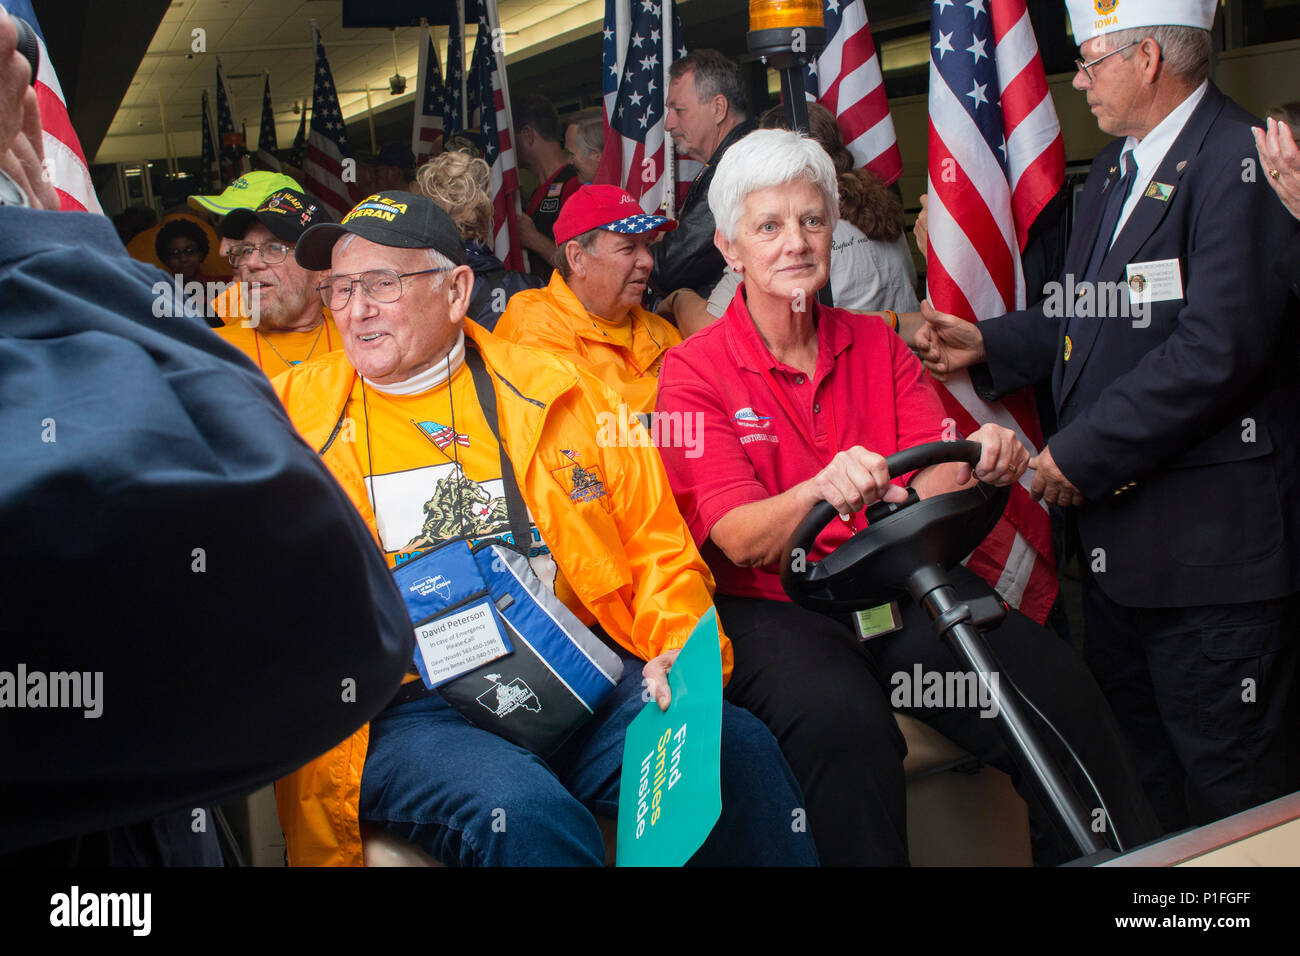 Veterans deboard their honor flight at the Quad City International Airport, Ill., Oct. 27, 2016. Honor Flight of the Quad Cities, a chapter of the Honor Flight Network, organizes flights for veterans of World War II and the Korean and Vietnam Wars to visit memorials dedicated to them in Washington, D.C. Volunteers, known as “guardians,” accompany the veterans to keep them company and assist as needed. Approximately 95 veterans and 65 guardians participated in this flight. (Photo by Staff Sgt. Ian M. Kummer, First Army Public Affairs) Stock Photo